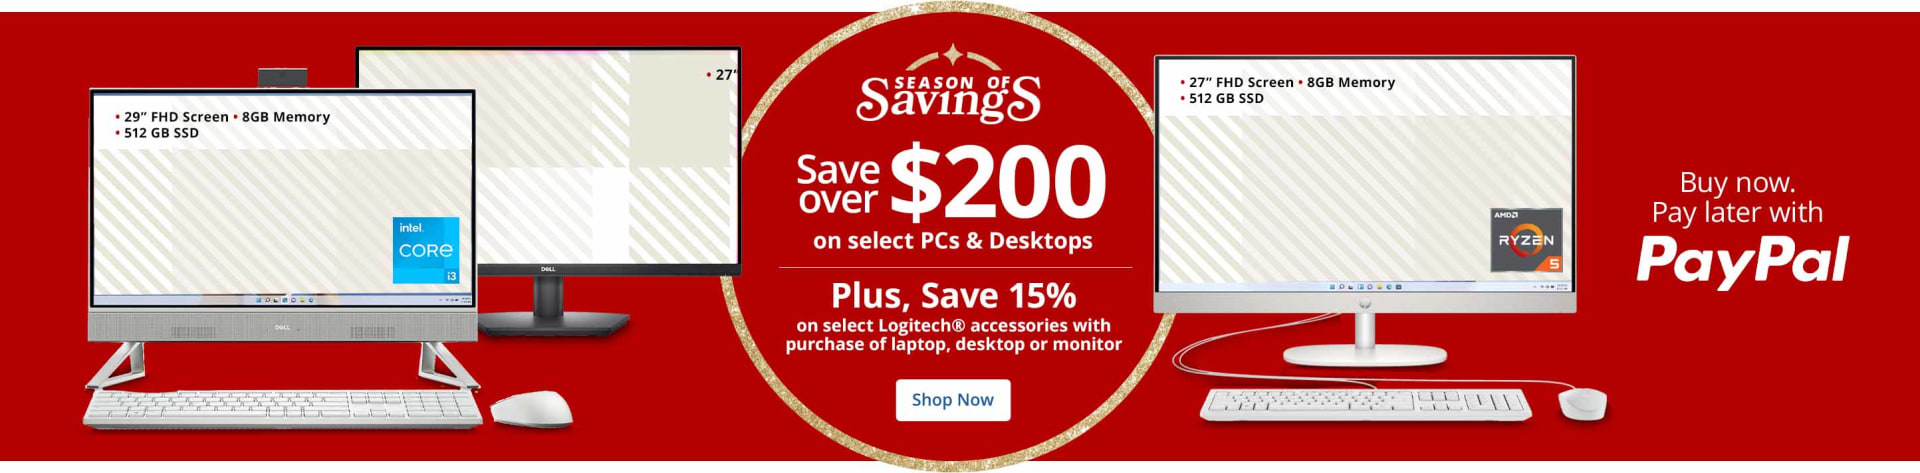 Save over $200 on Select PCs